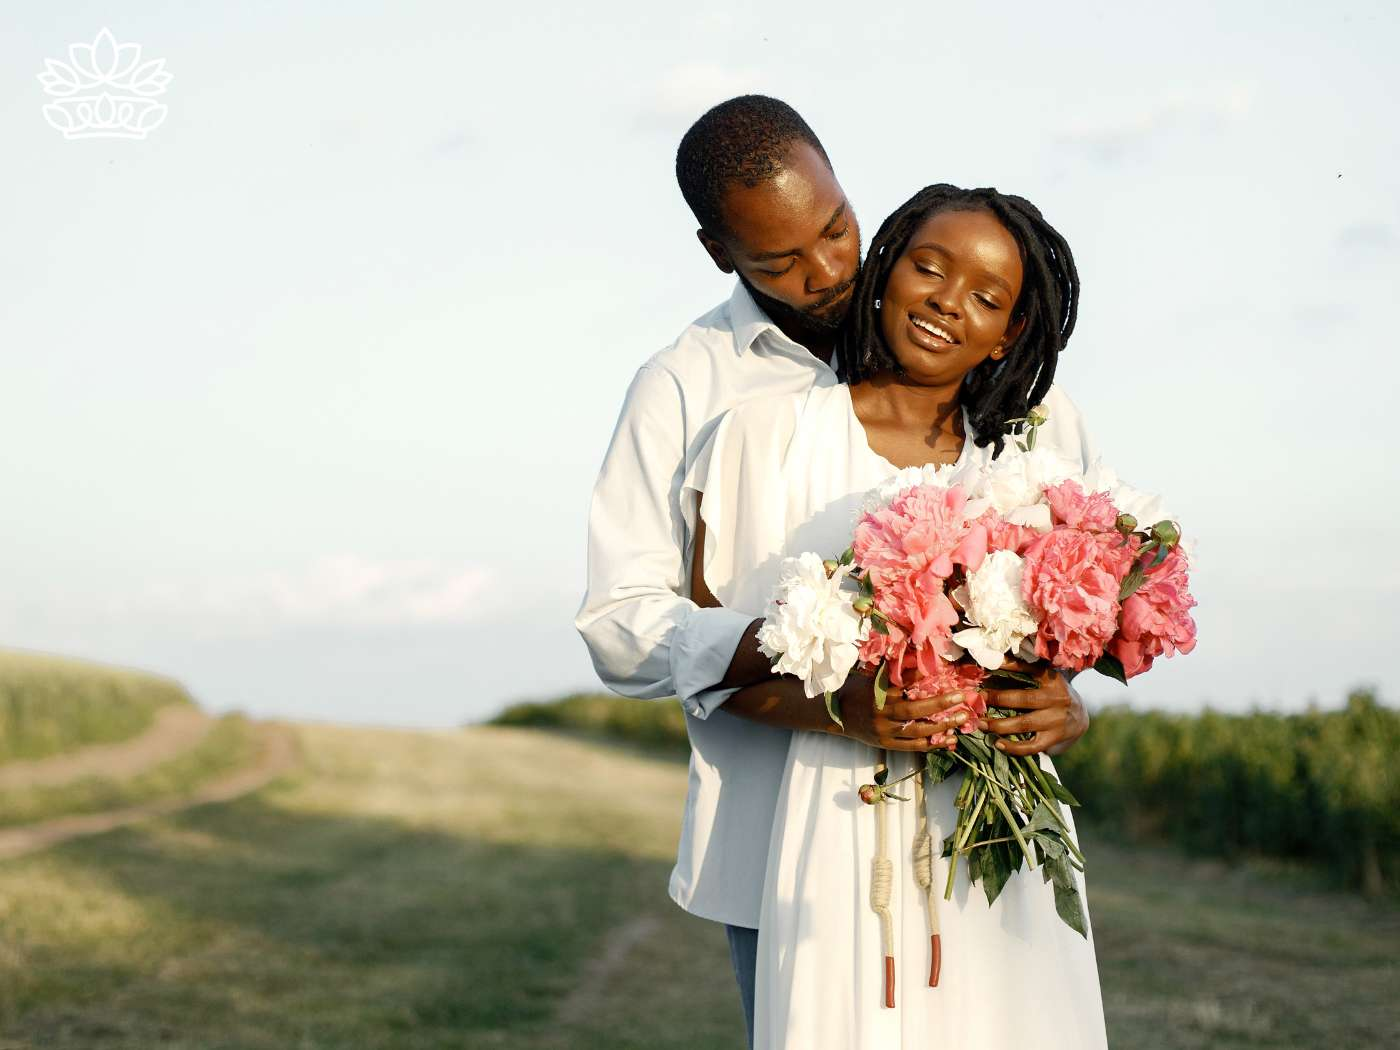 A loving couple shares an intimate moment in a serene field, the woman holding a lush bouquet from the Engagement Flowers Collection, a testament to their shared journey ahead, brought to you by Fabulous Flowers and Gifts.